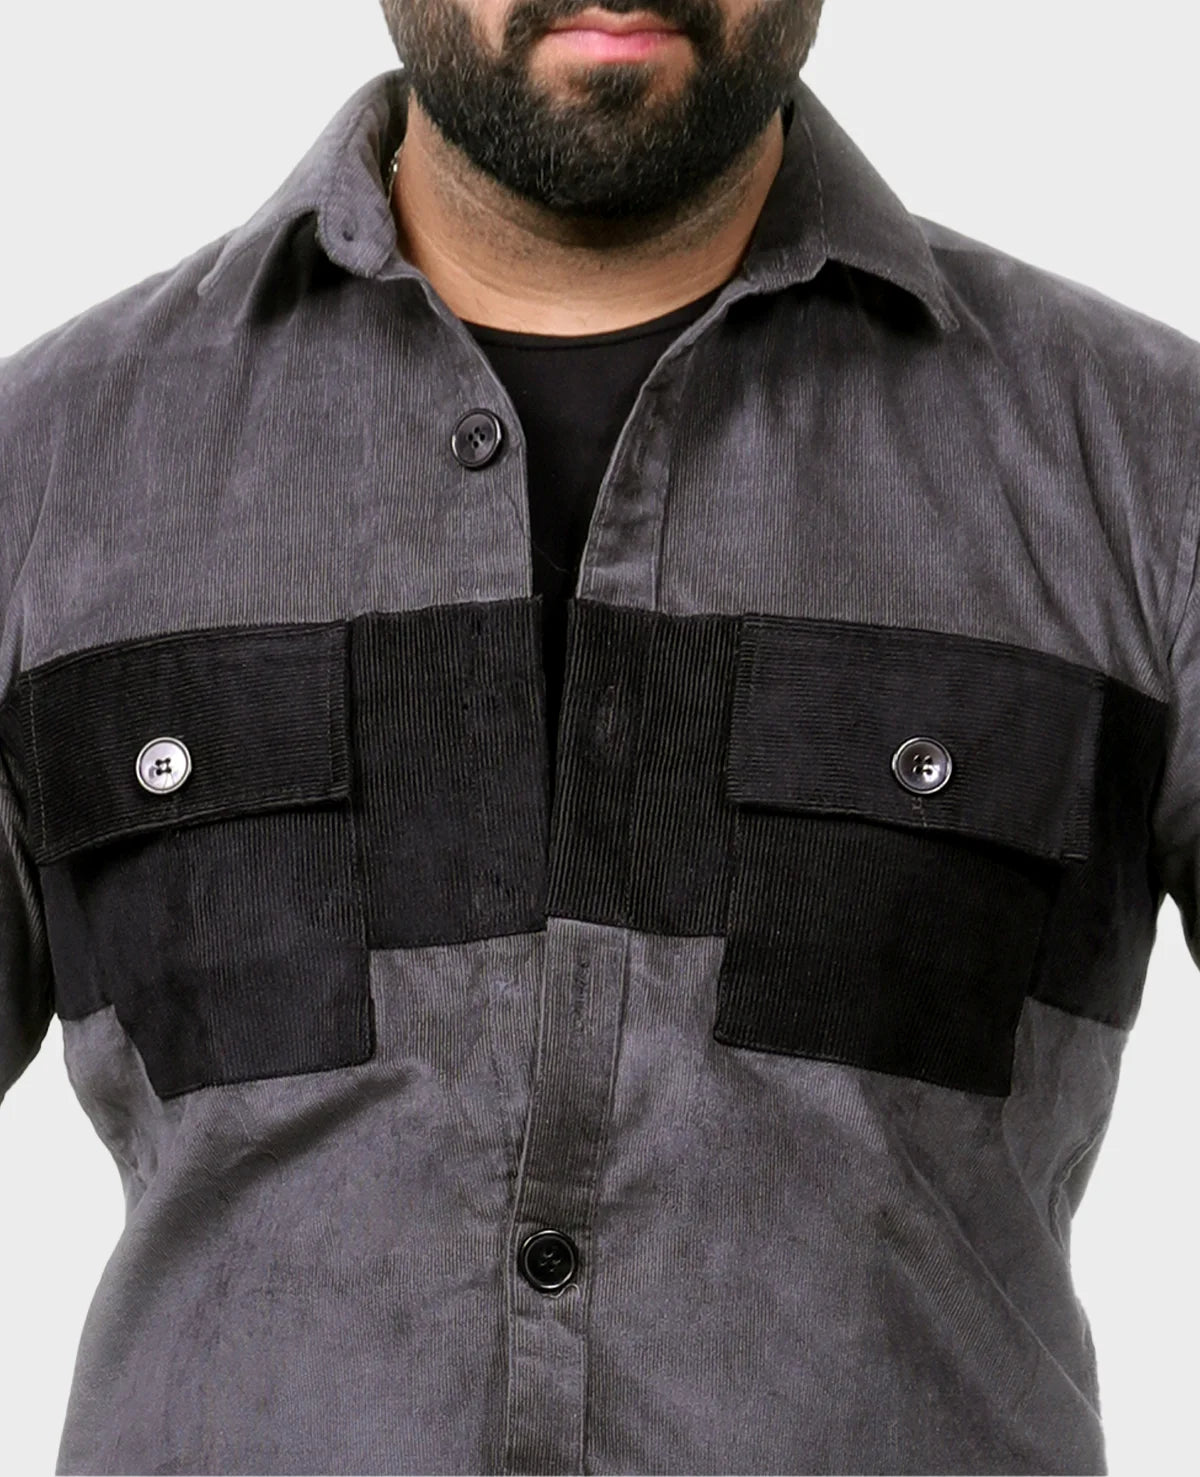 Dark Grey Corduroy Men's Shacket with Black Pockets - Perfect for Parties